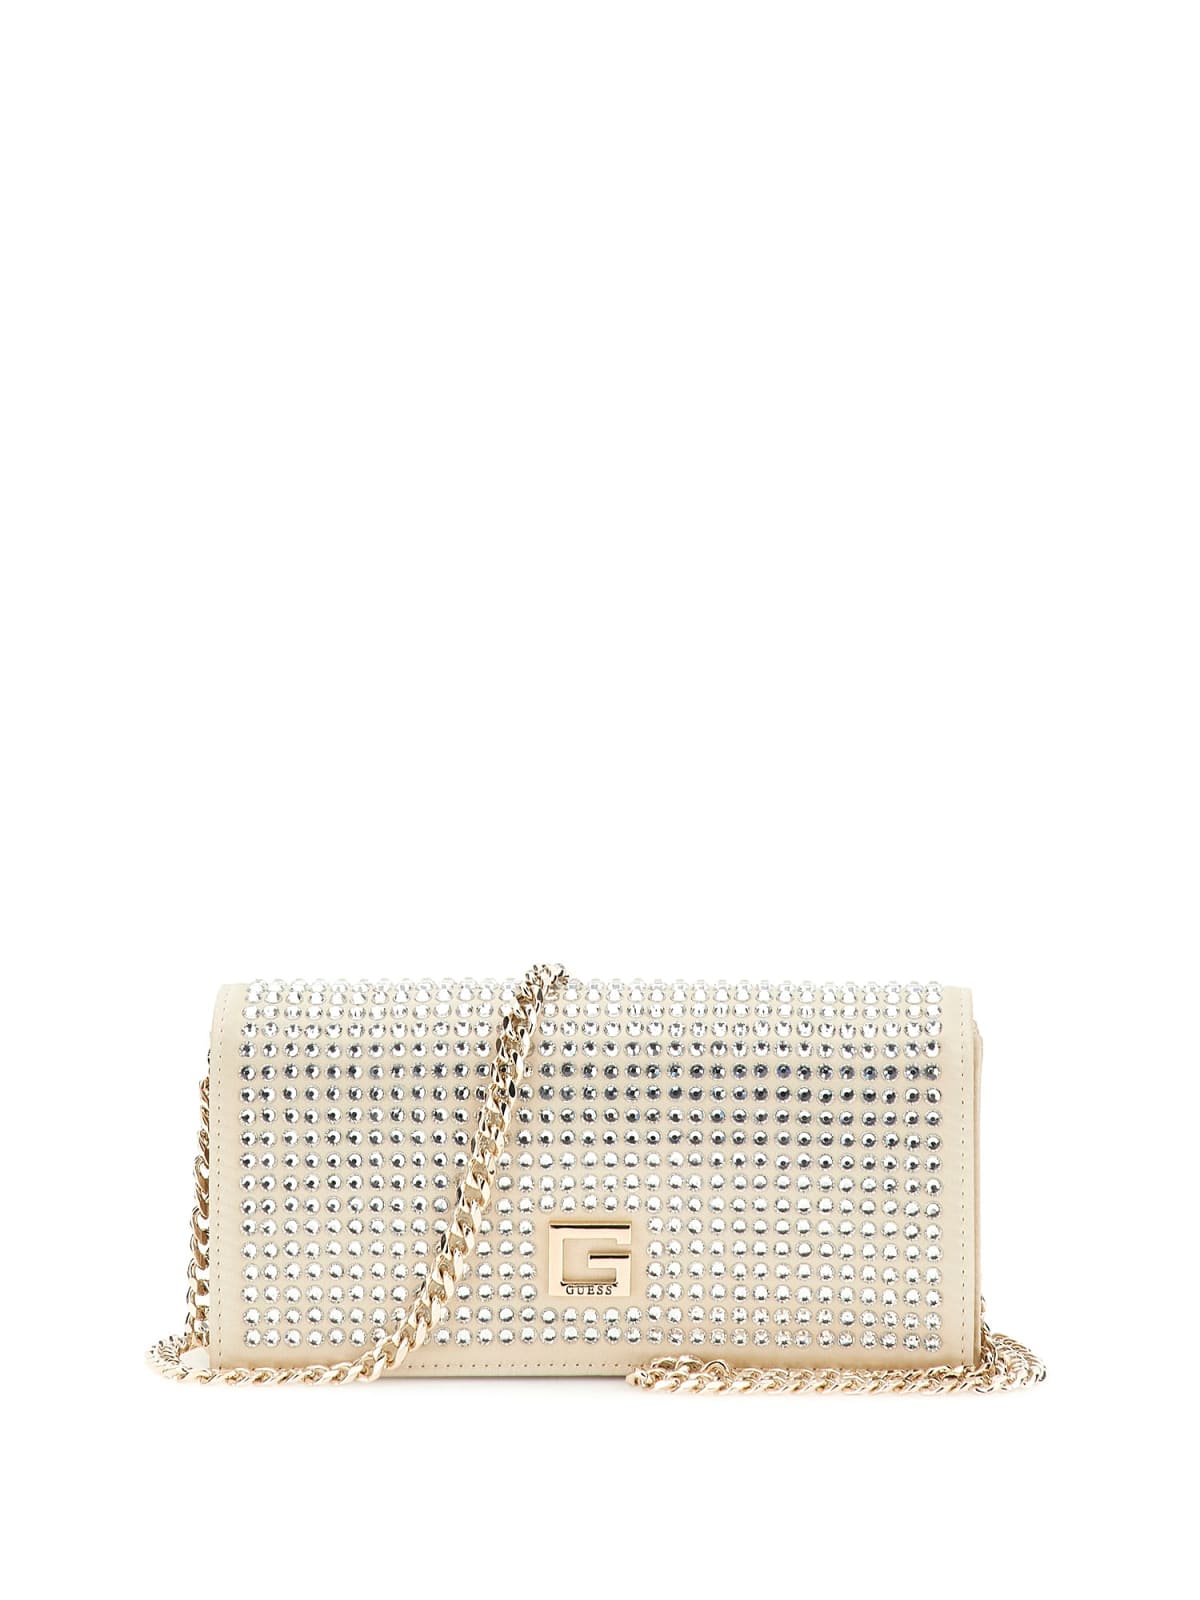 GUESS GLAMOUR CLUTCH PALE GOLD